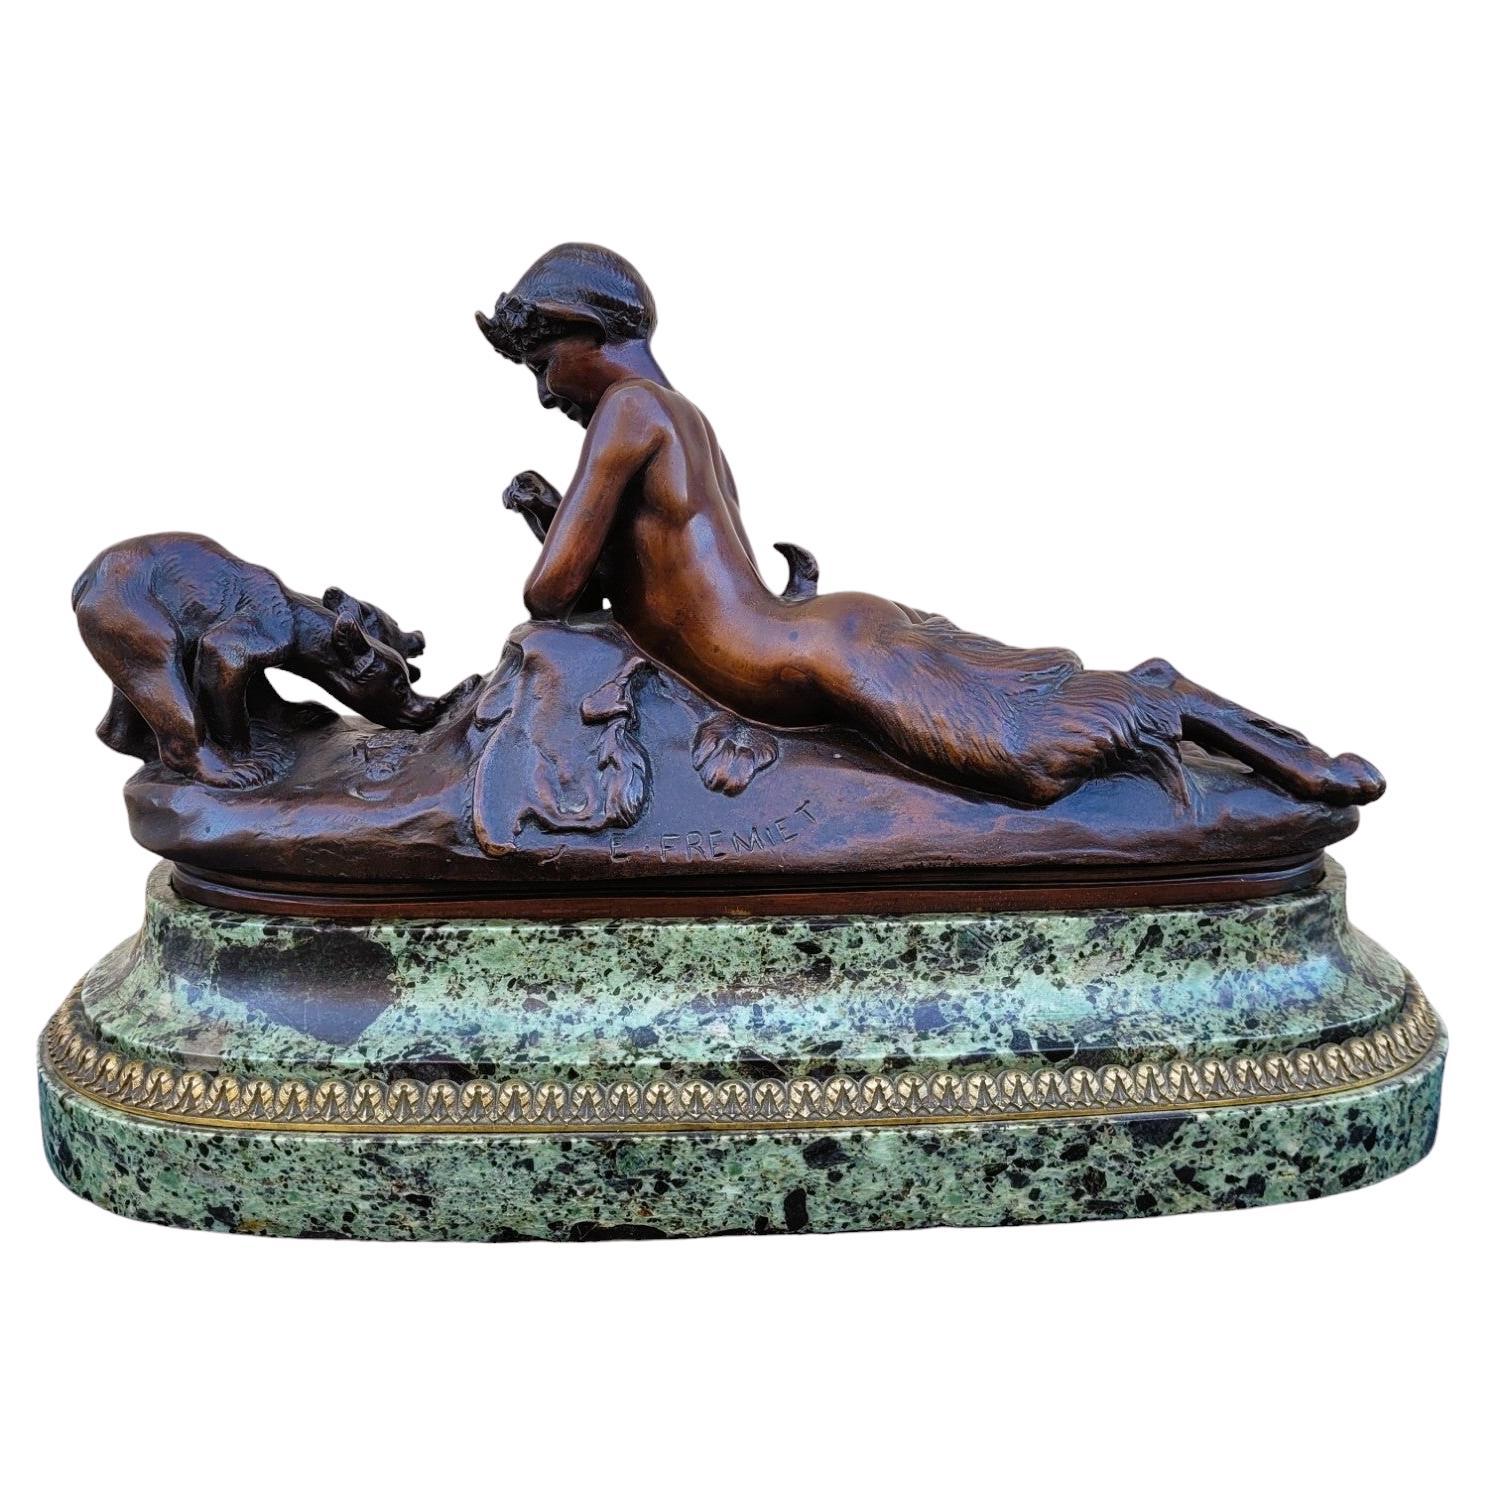 E Frémiet, Pan And Oursons, Signed Bronze, Late 19th Early 20th Century